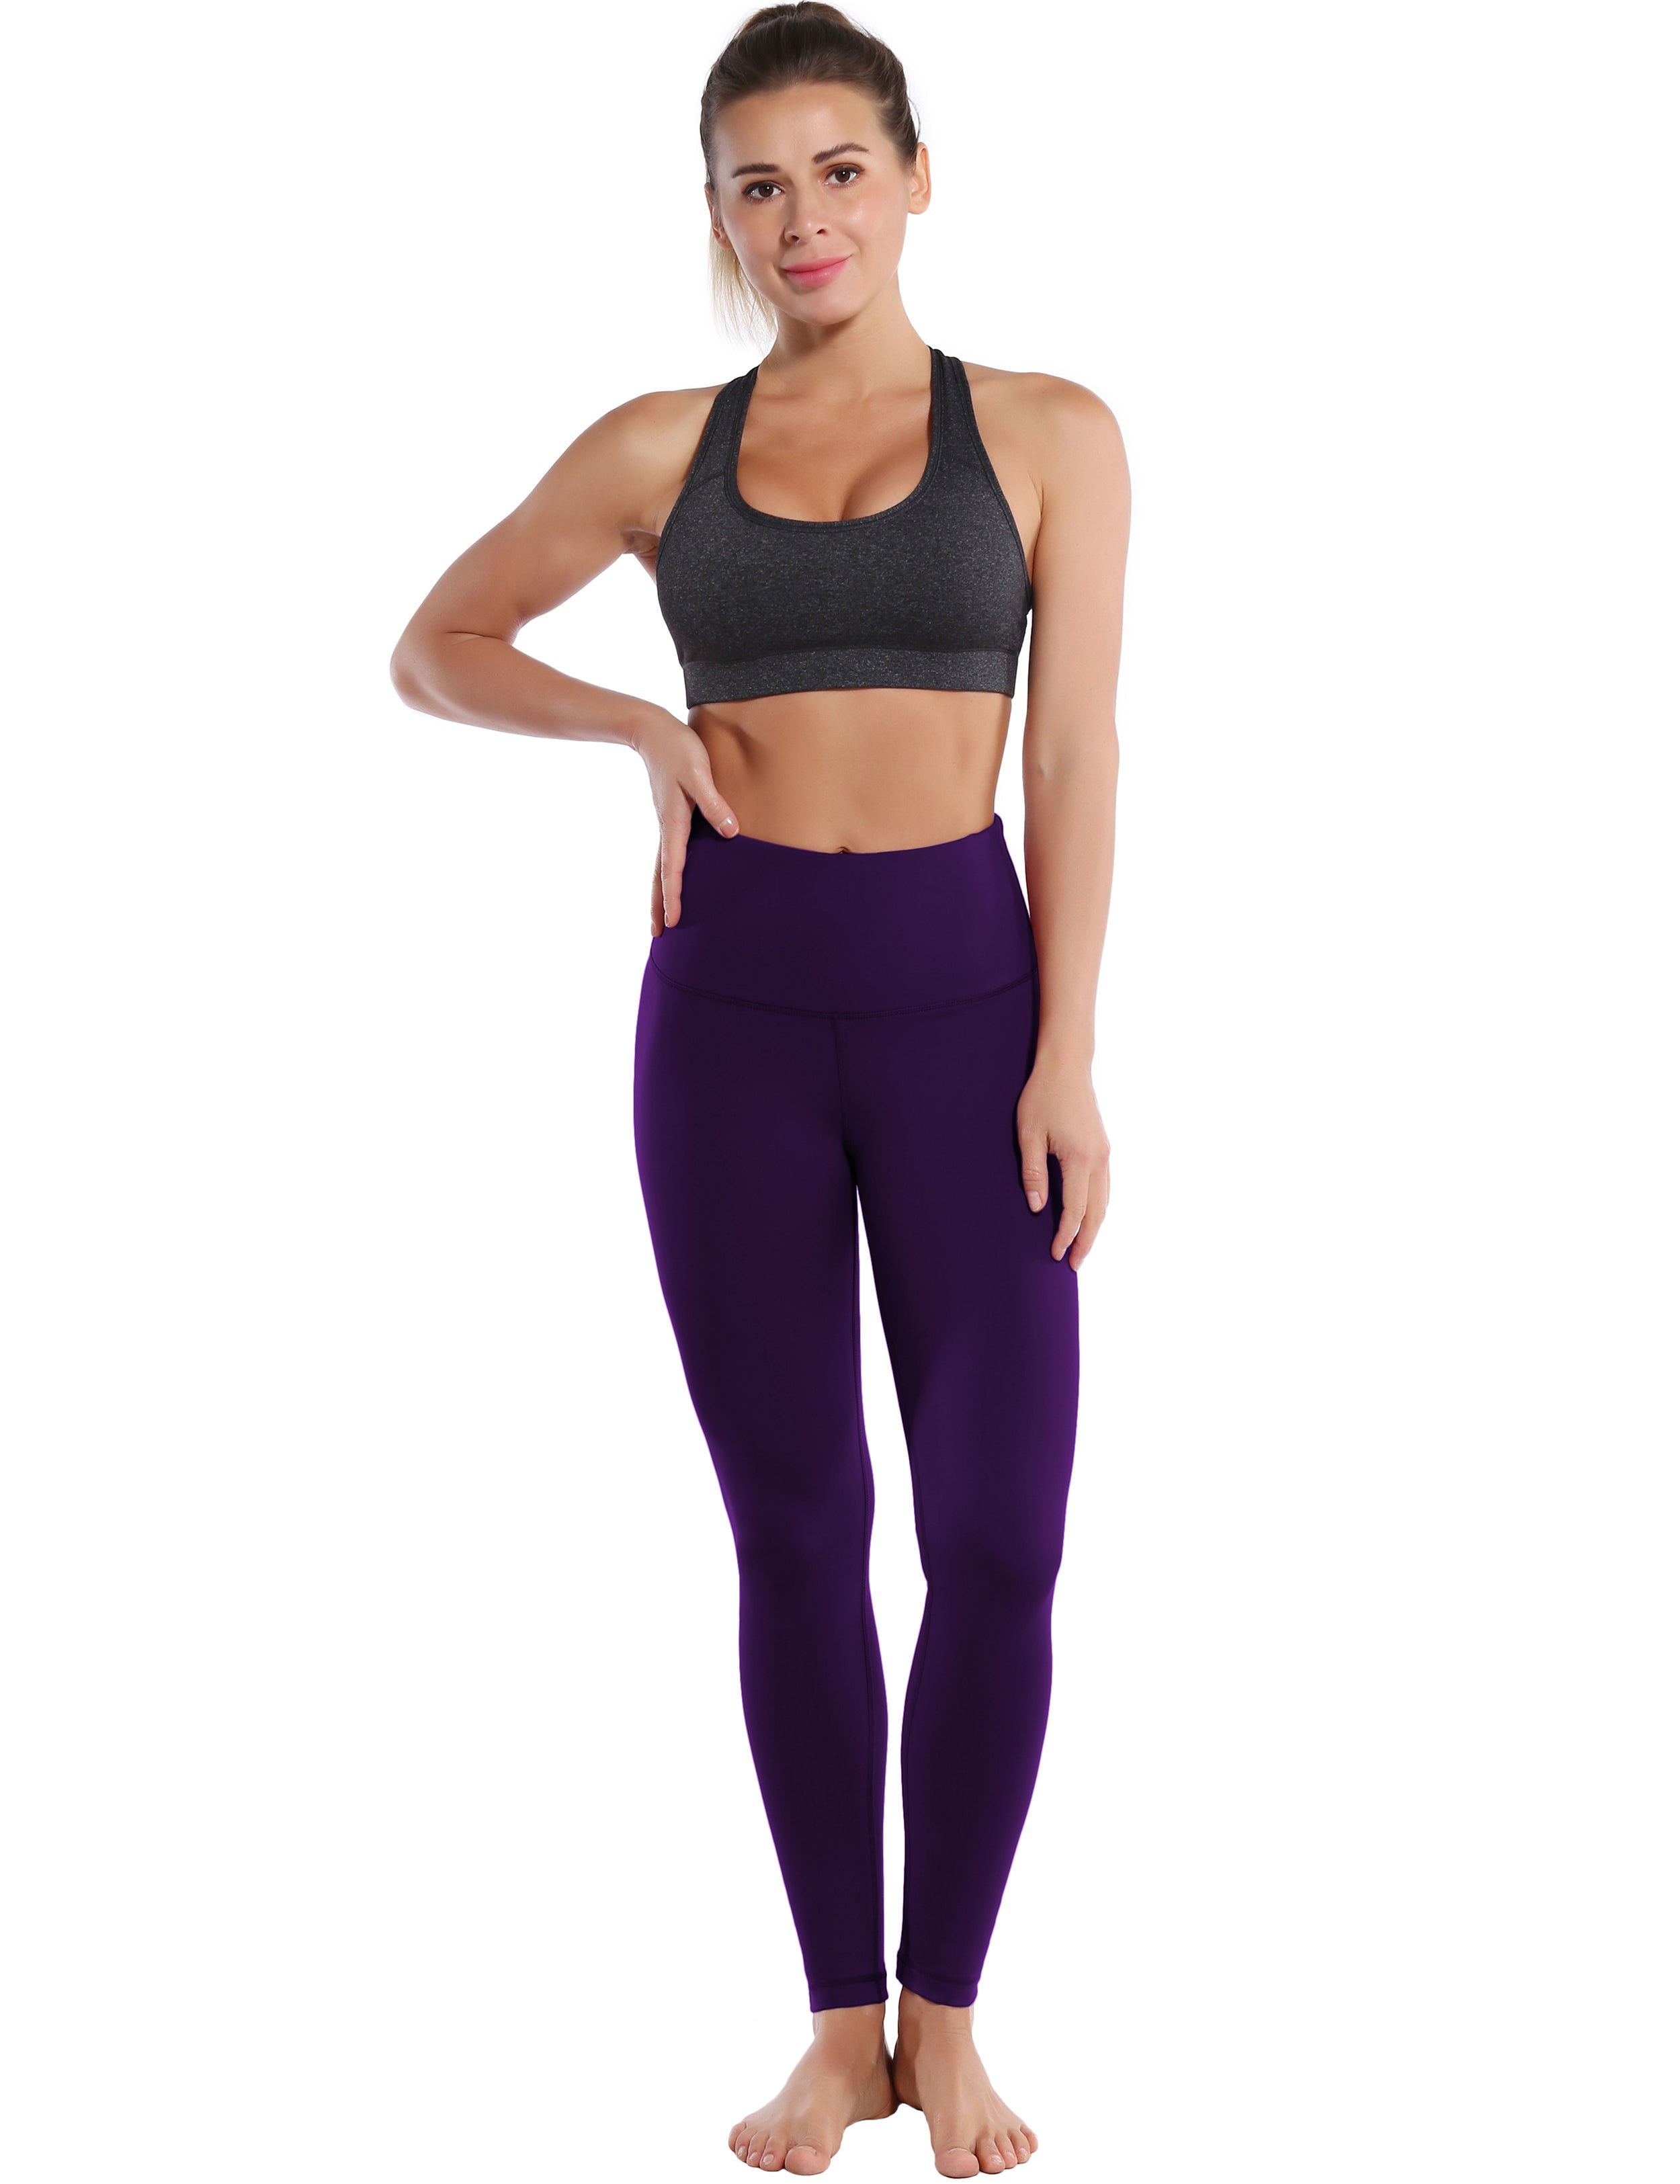 High Waist Gym Pants eggplantpurple 75%Nylon/25%Spandex Fabric doesn't attract lint easily 4-way stretch No see-through Moisture-wicking Tummy control Inner pocket Four lengths